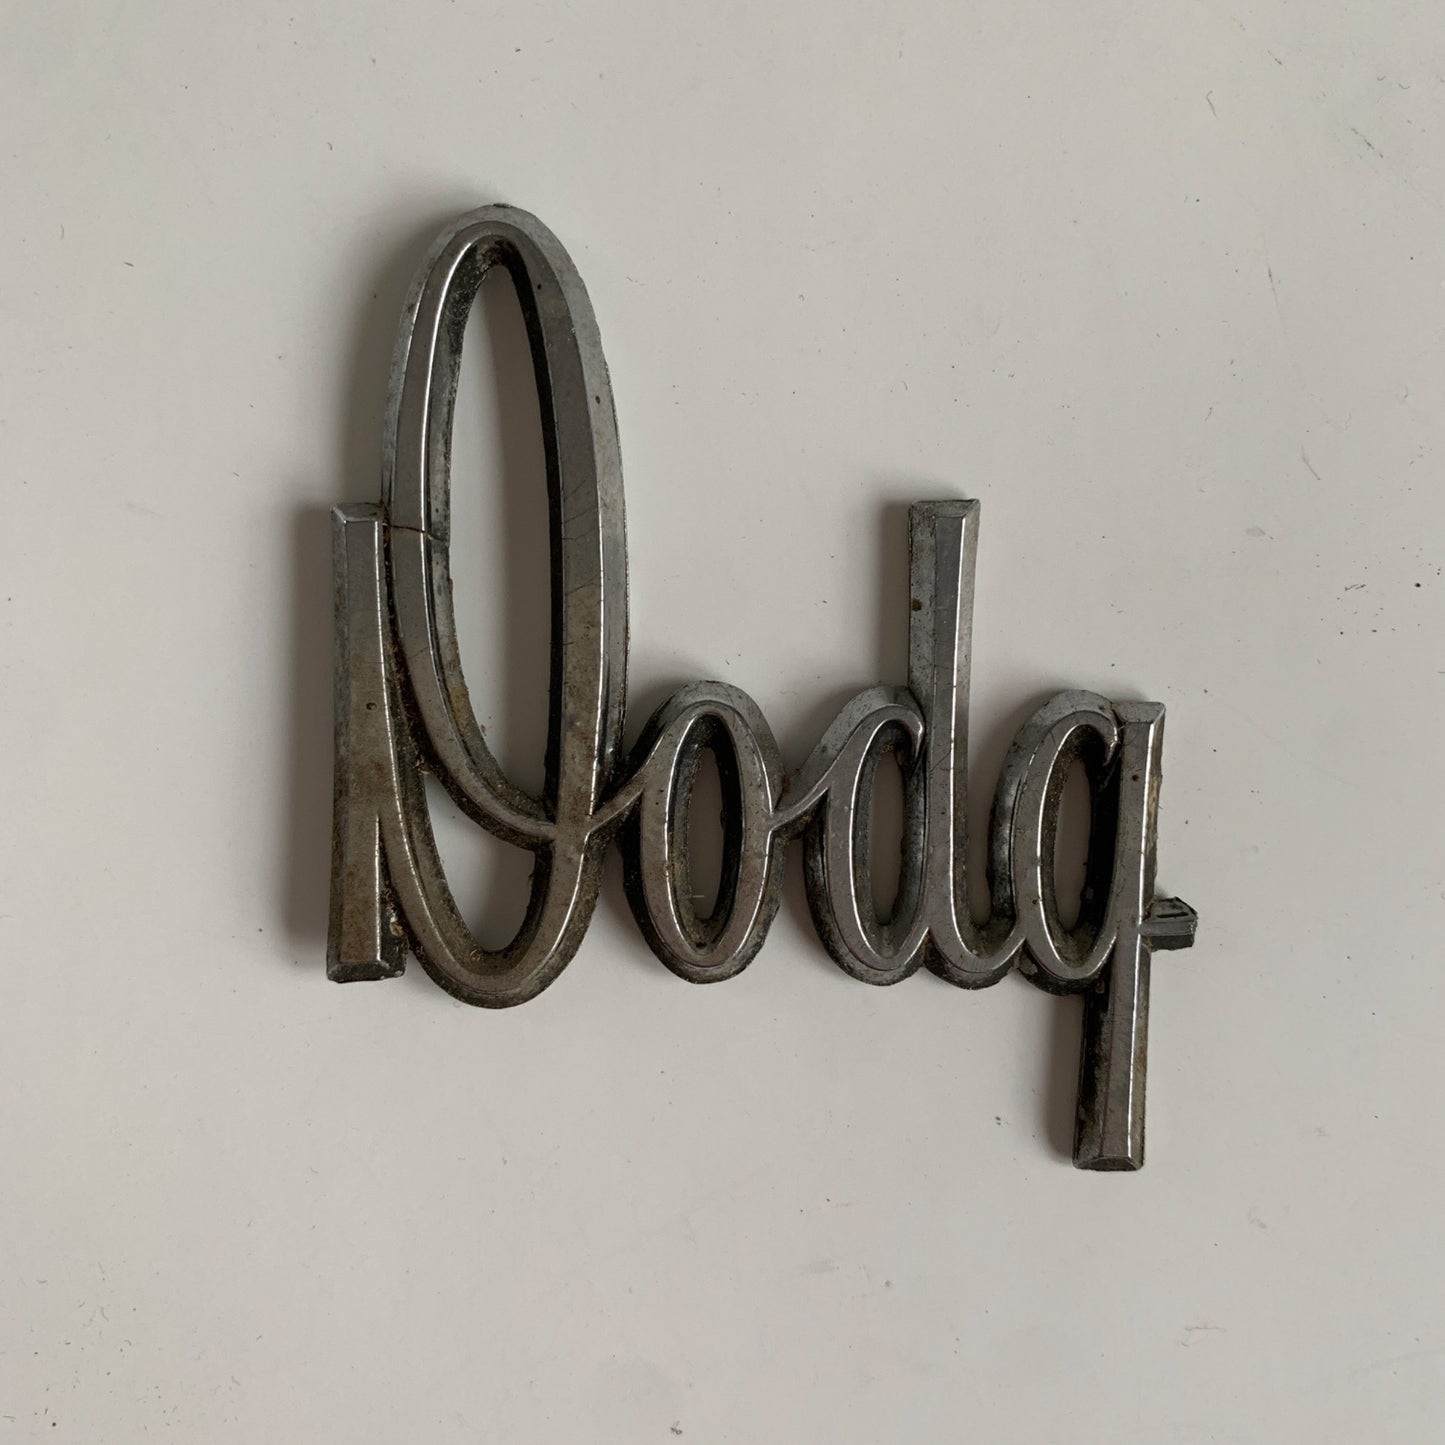 Vintage Dodge Emblem FOR PARTS OR REPAIR - WITHOUT THE "E"